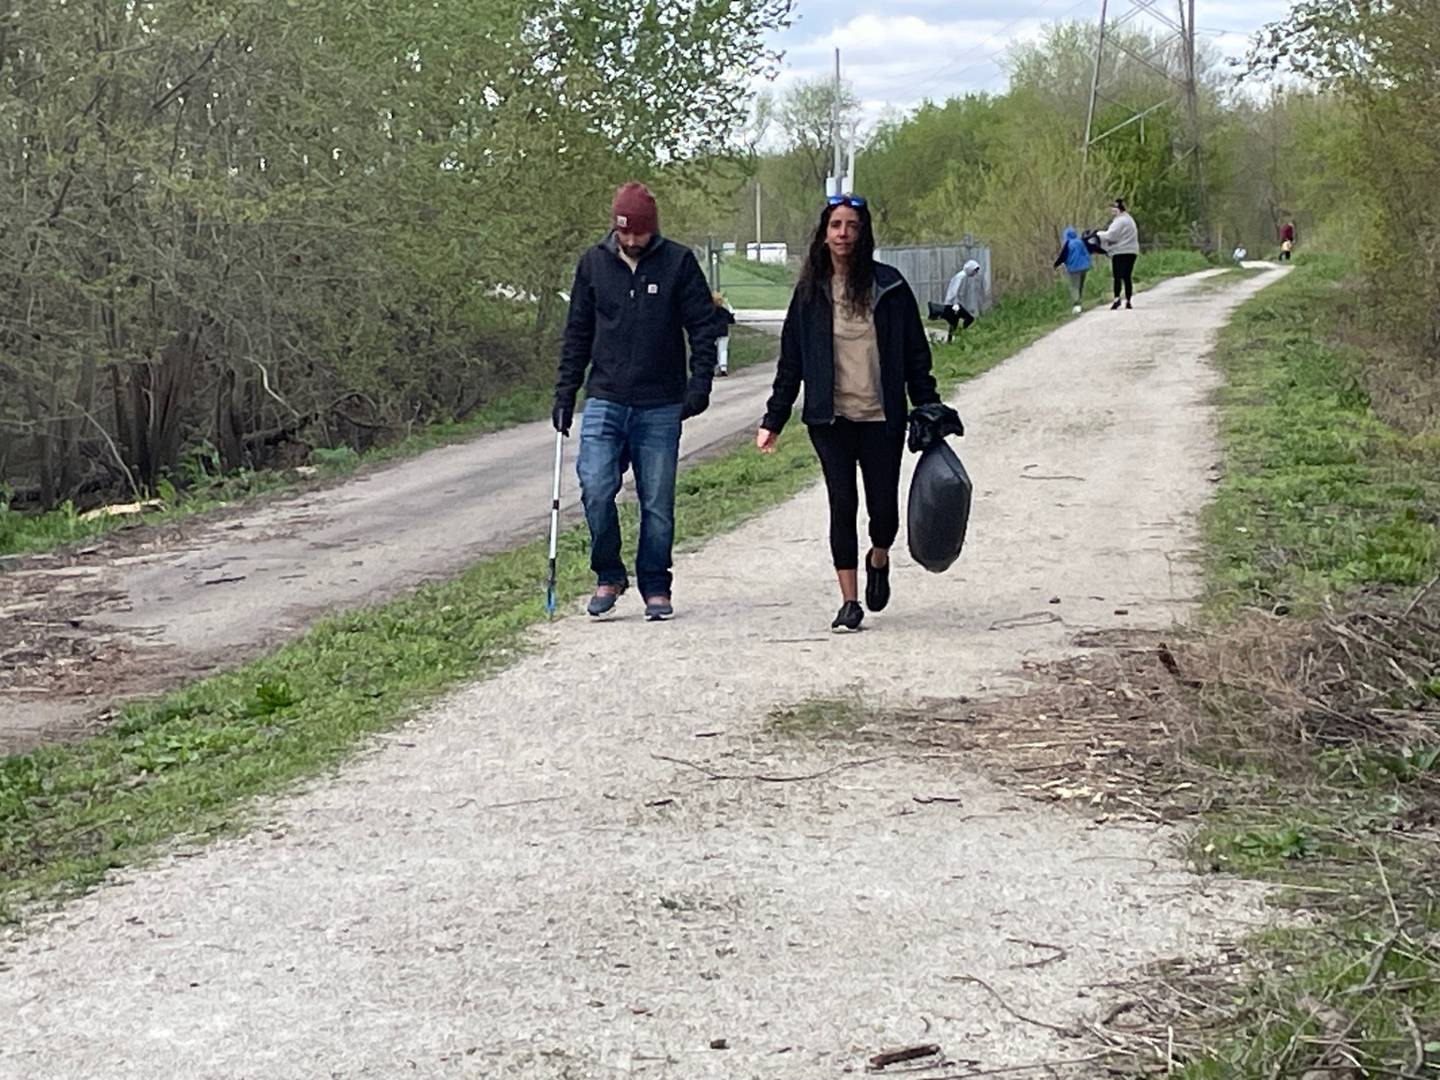 Joseph Whiting of Peru and Holly Disch of Peru help scour the trail for litter near Lock 16 in La Salle during the Earth Day Community Cleanup on Saturday, April 20, 2024. "It's our first time," Disch said. "It’s a good cause. It won’t be our last time, that’s for sure."